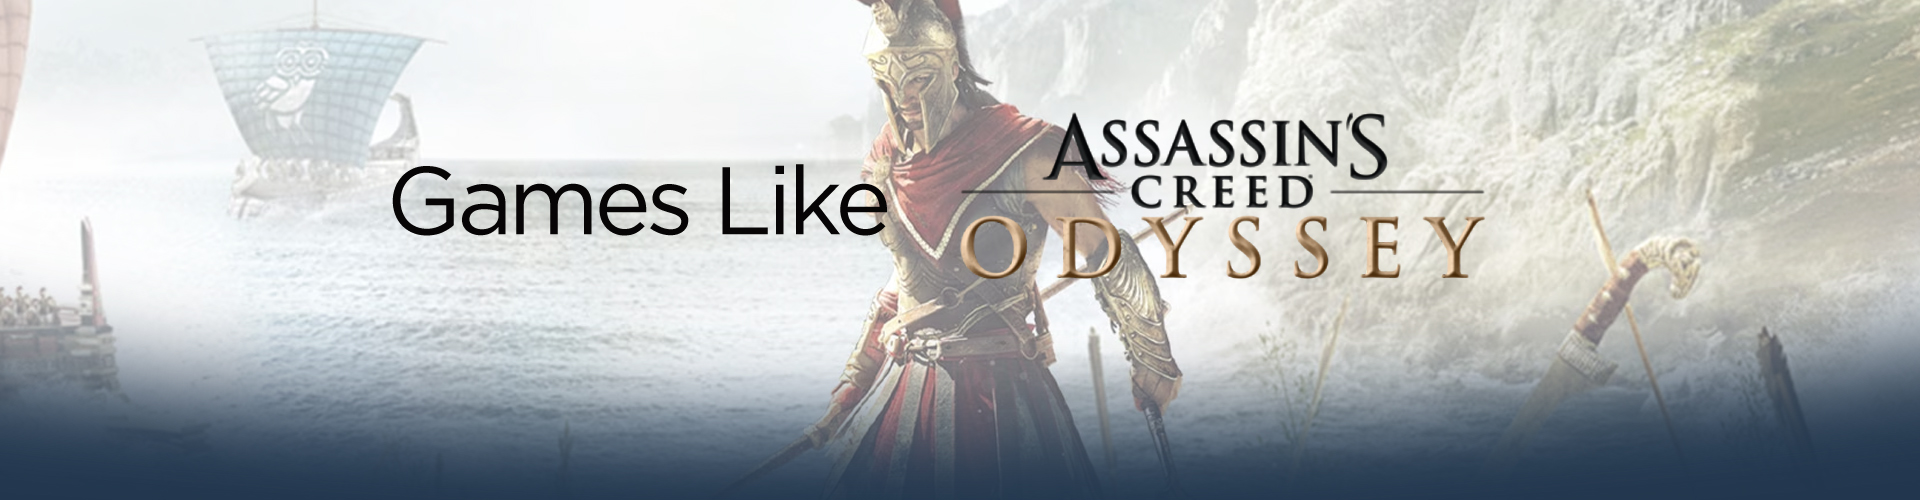 Games like Assassin's Creed Odyssey